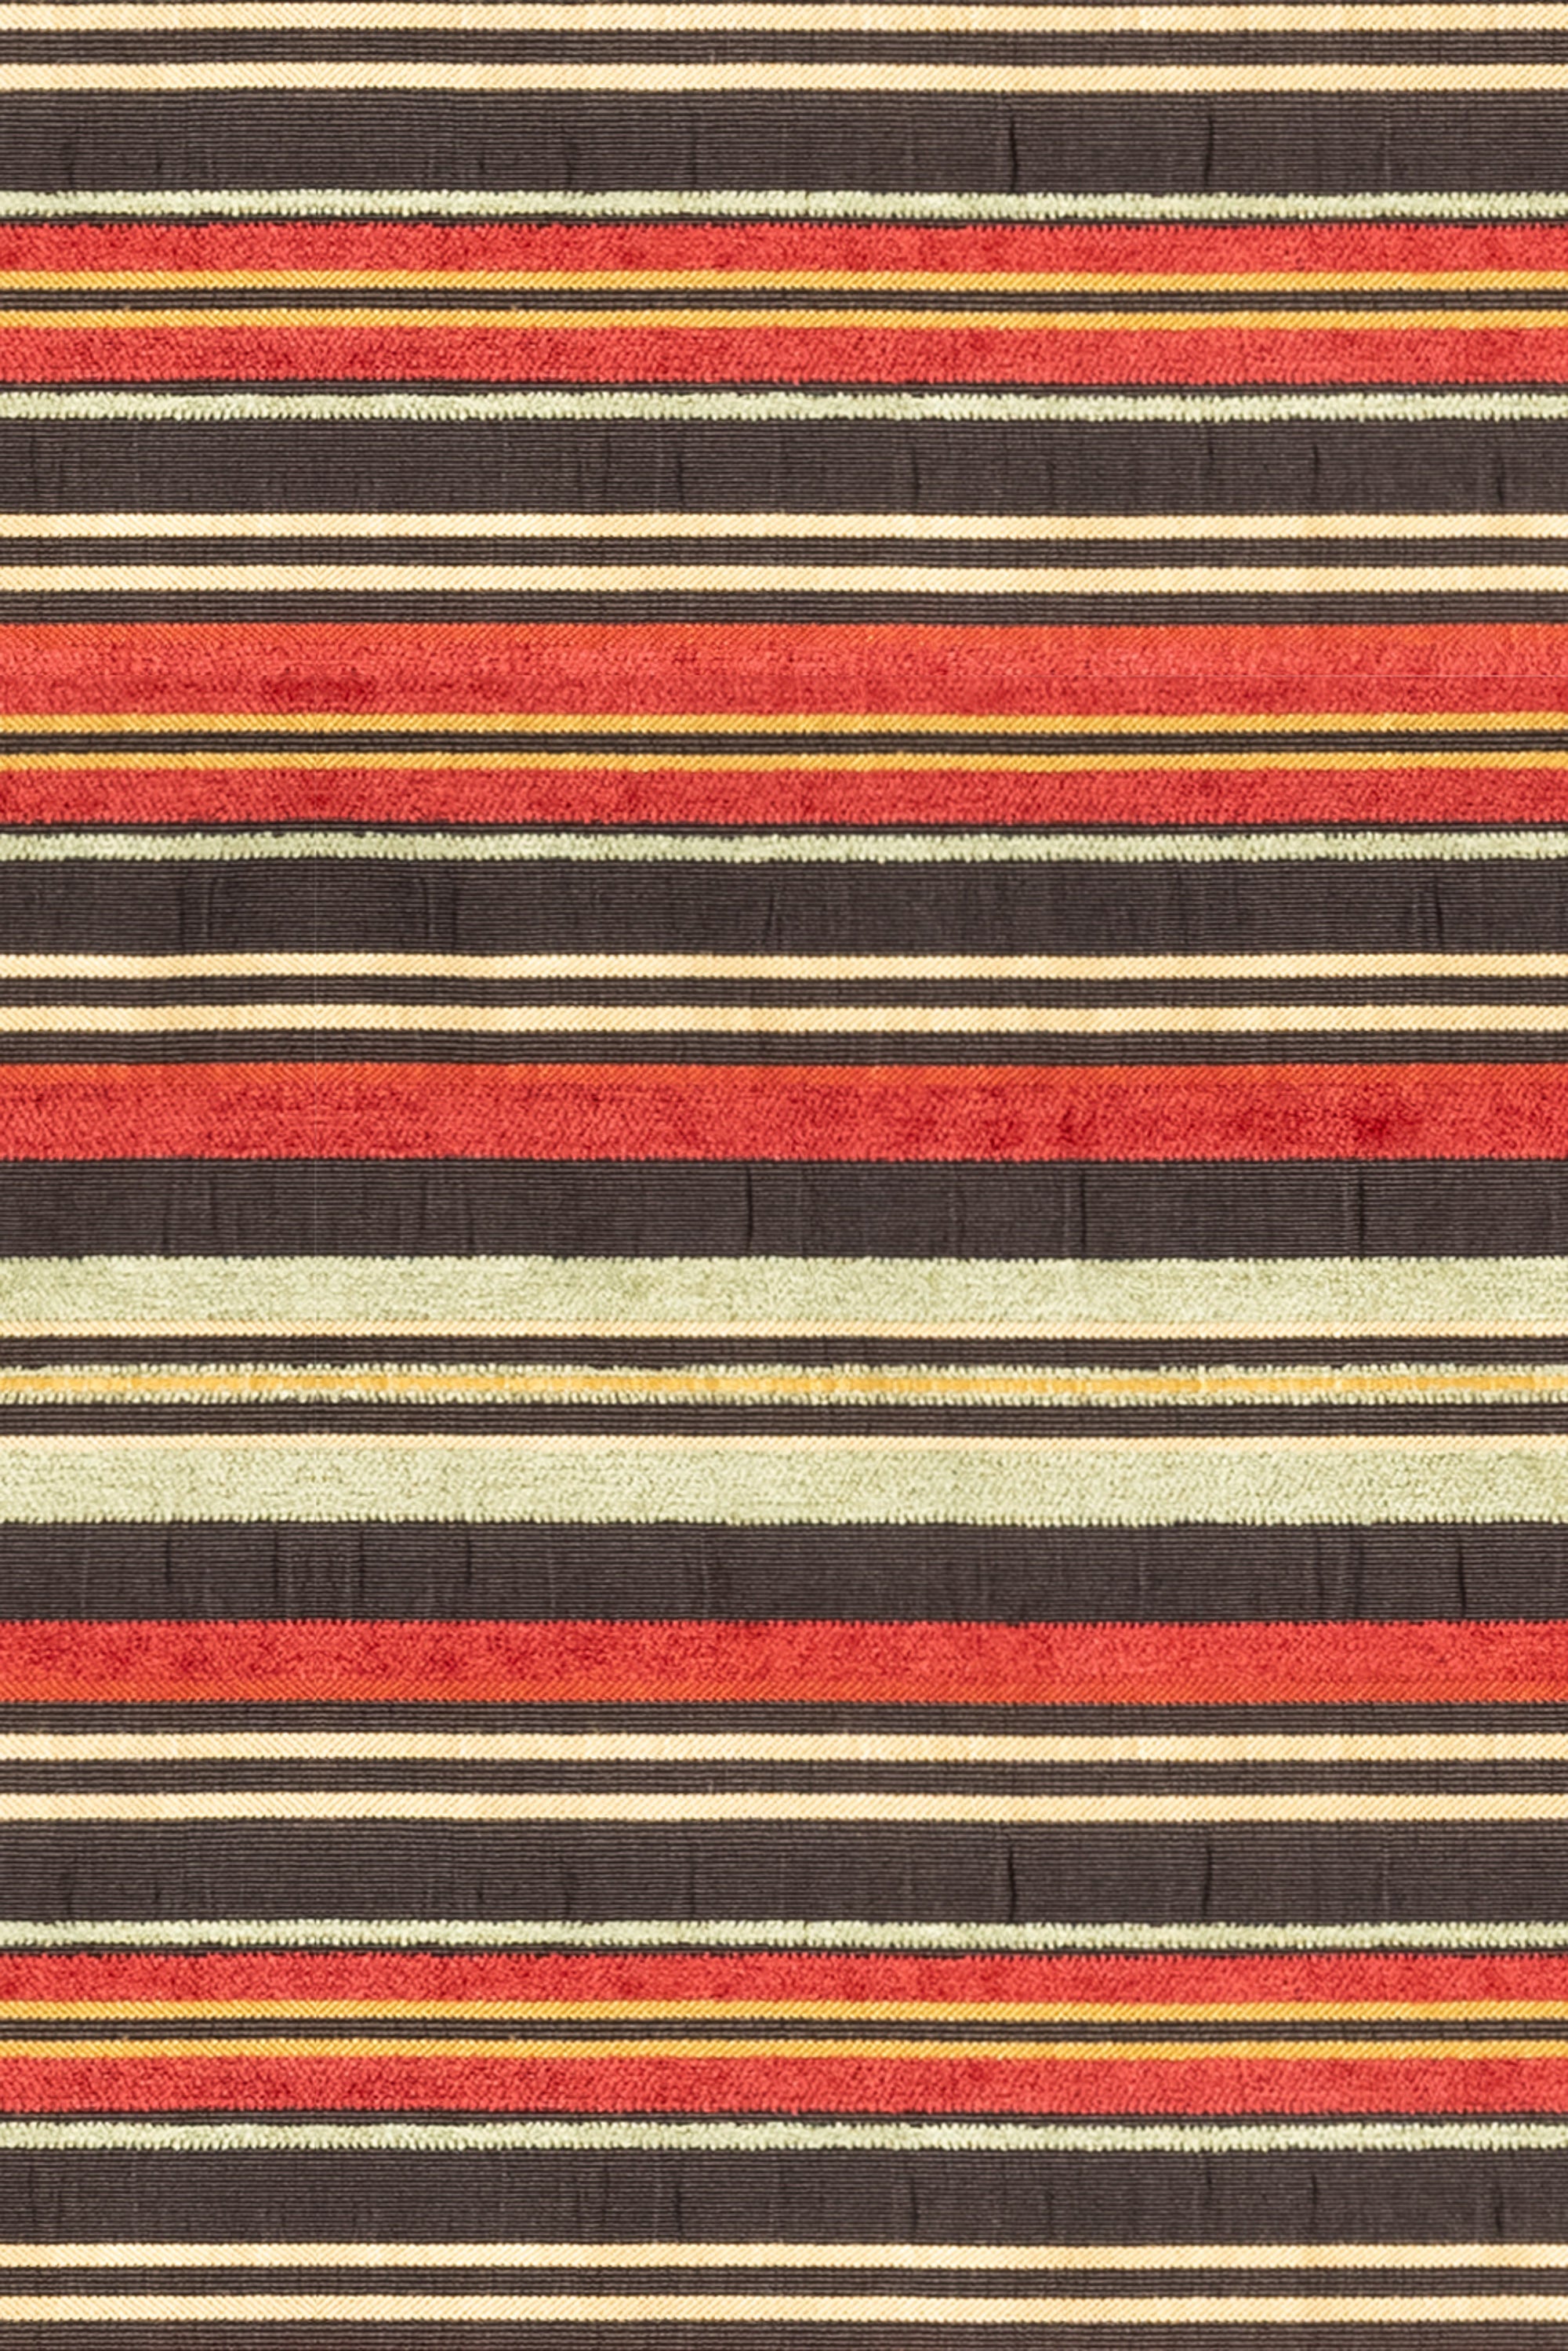 Fabric by the Yard - Performance French Stripe